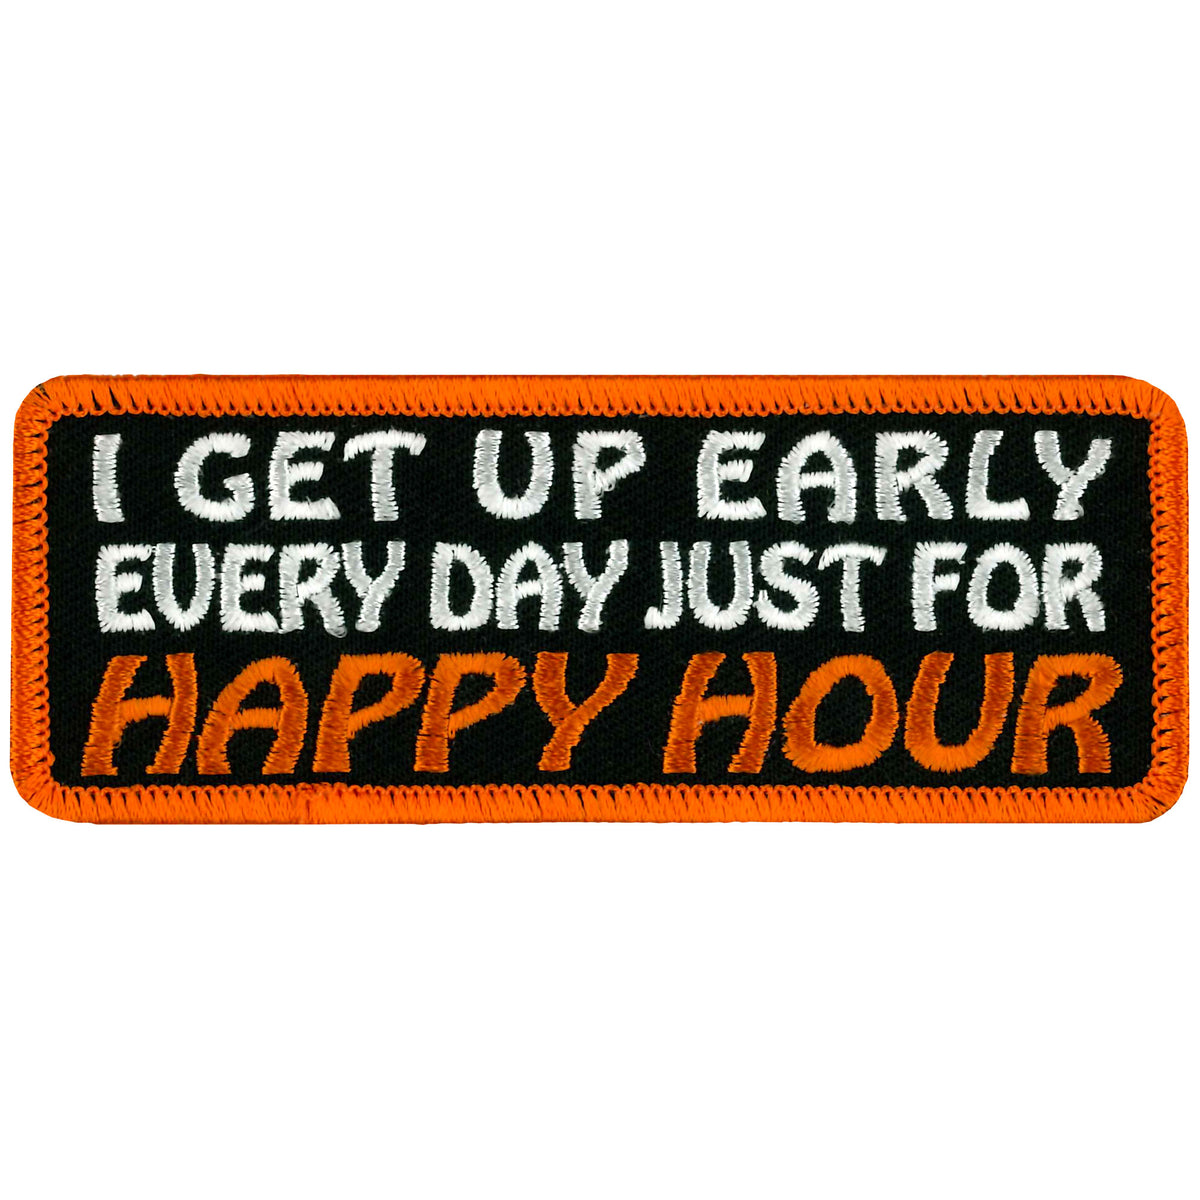 Hot Leathers PPL9206 Just for Happy Hour 4" Patch